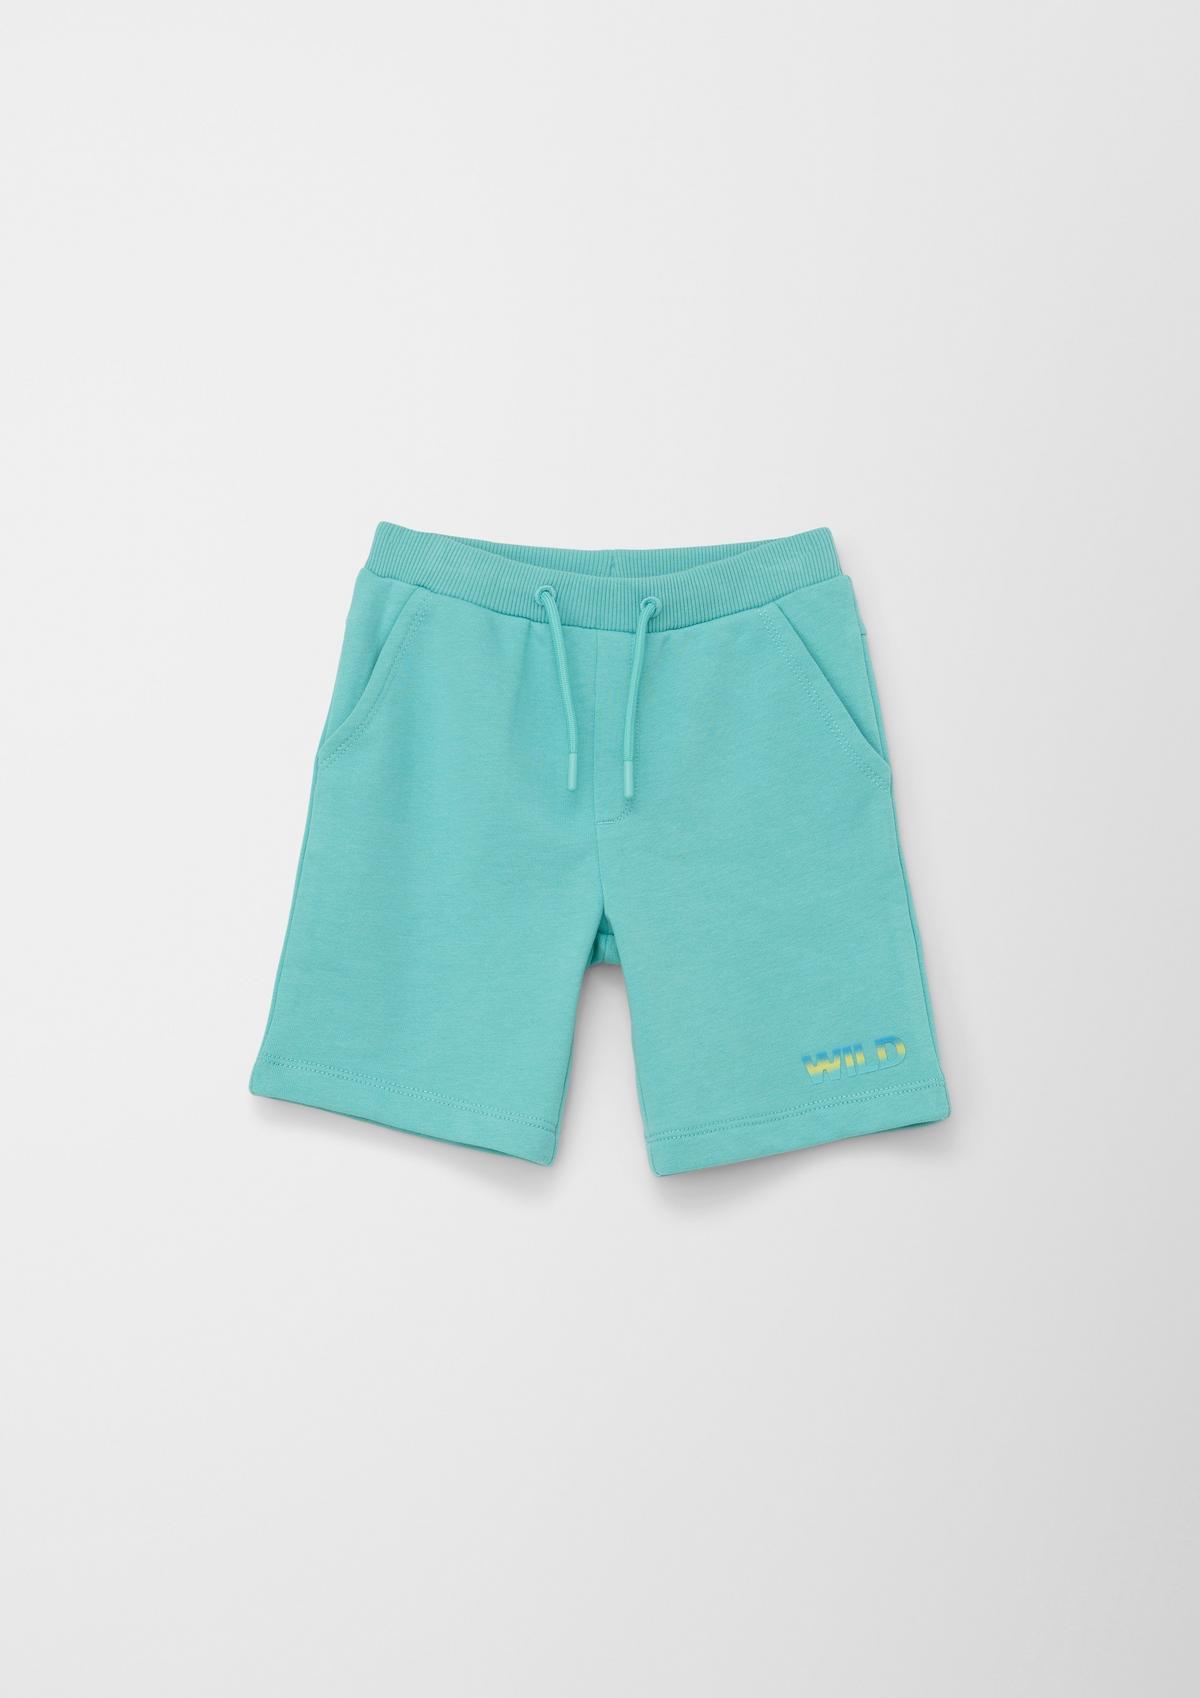 s.Oliver Loose fit: Bermudas made of sweatshirt fabric